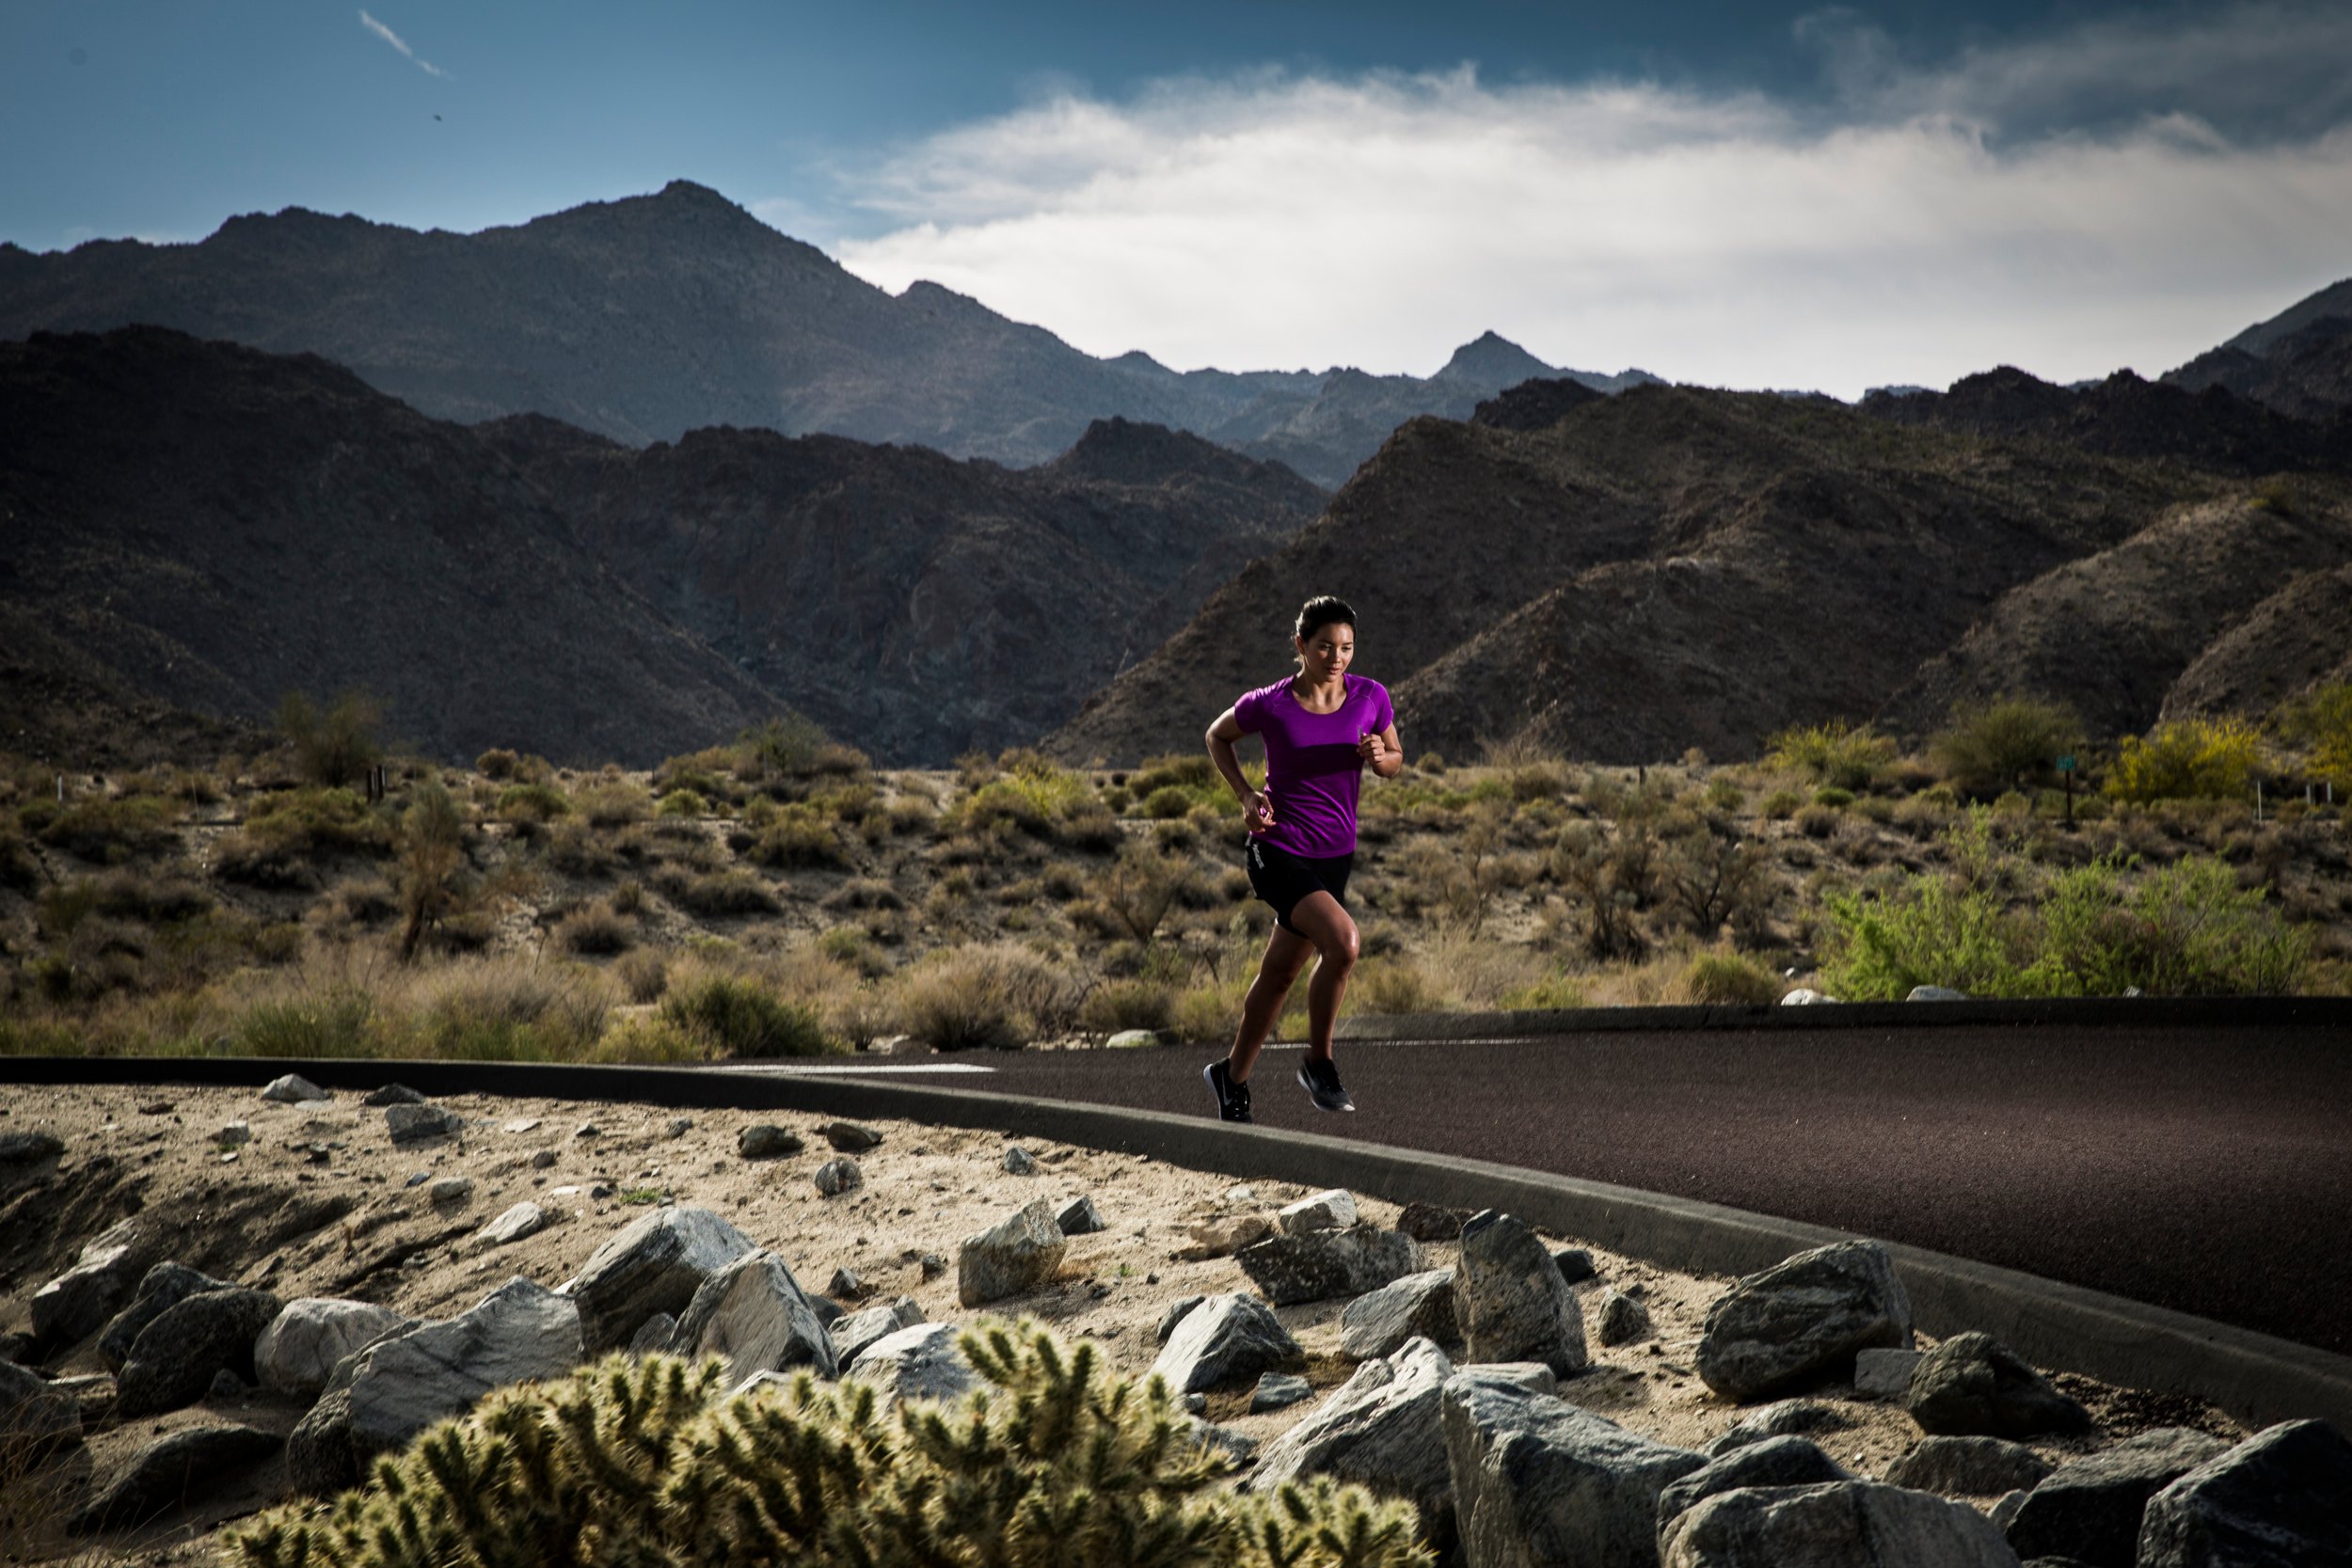 sports/fitness photography showing a woman running, by kristyna archer